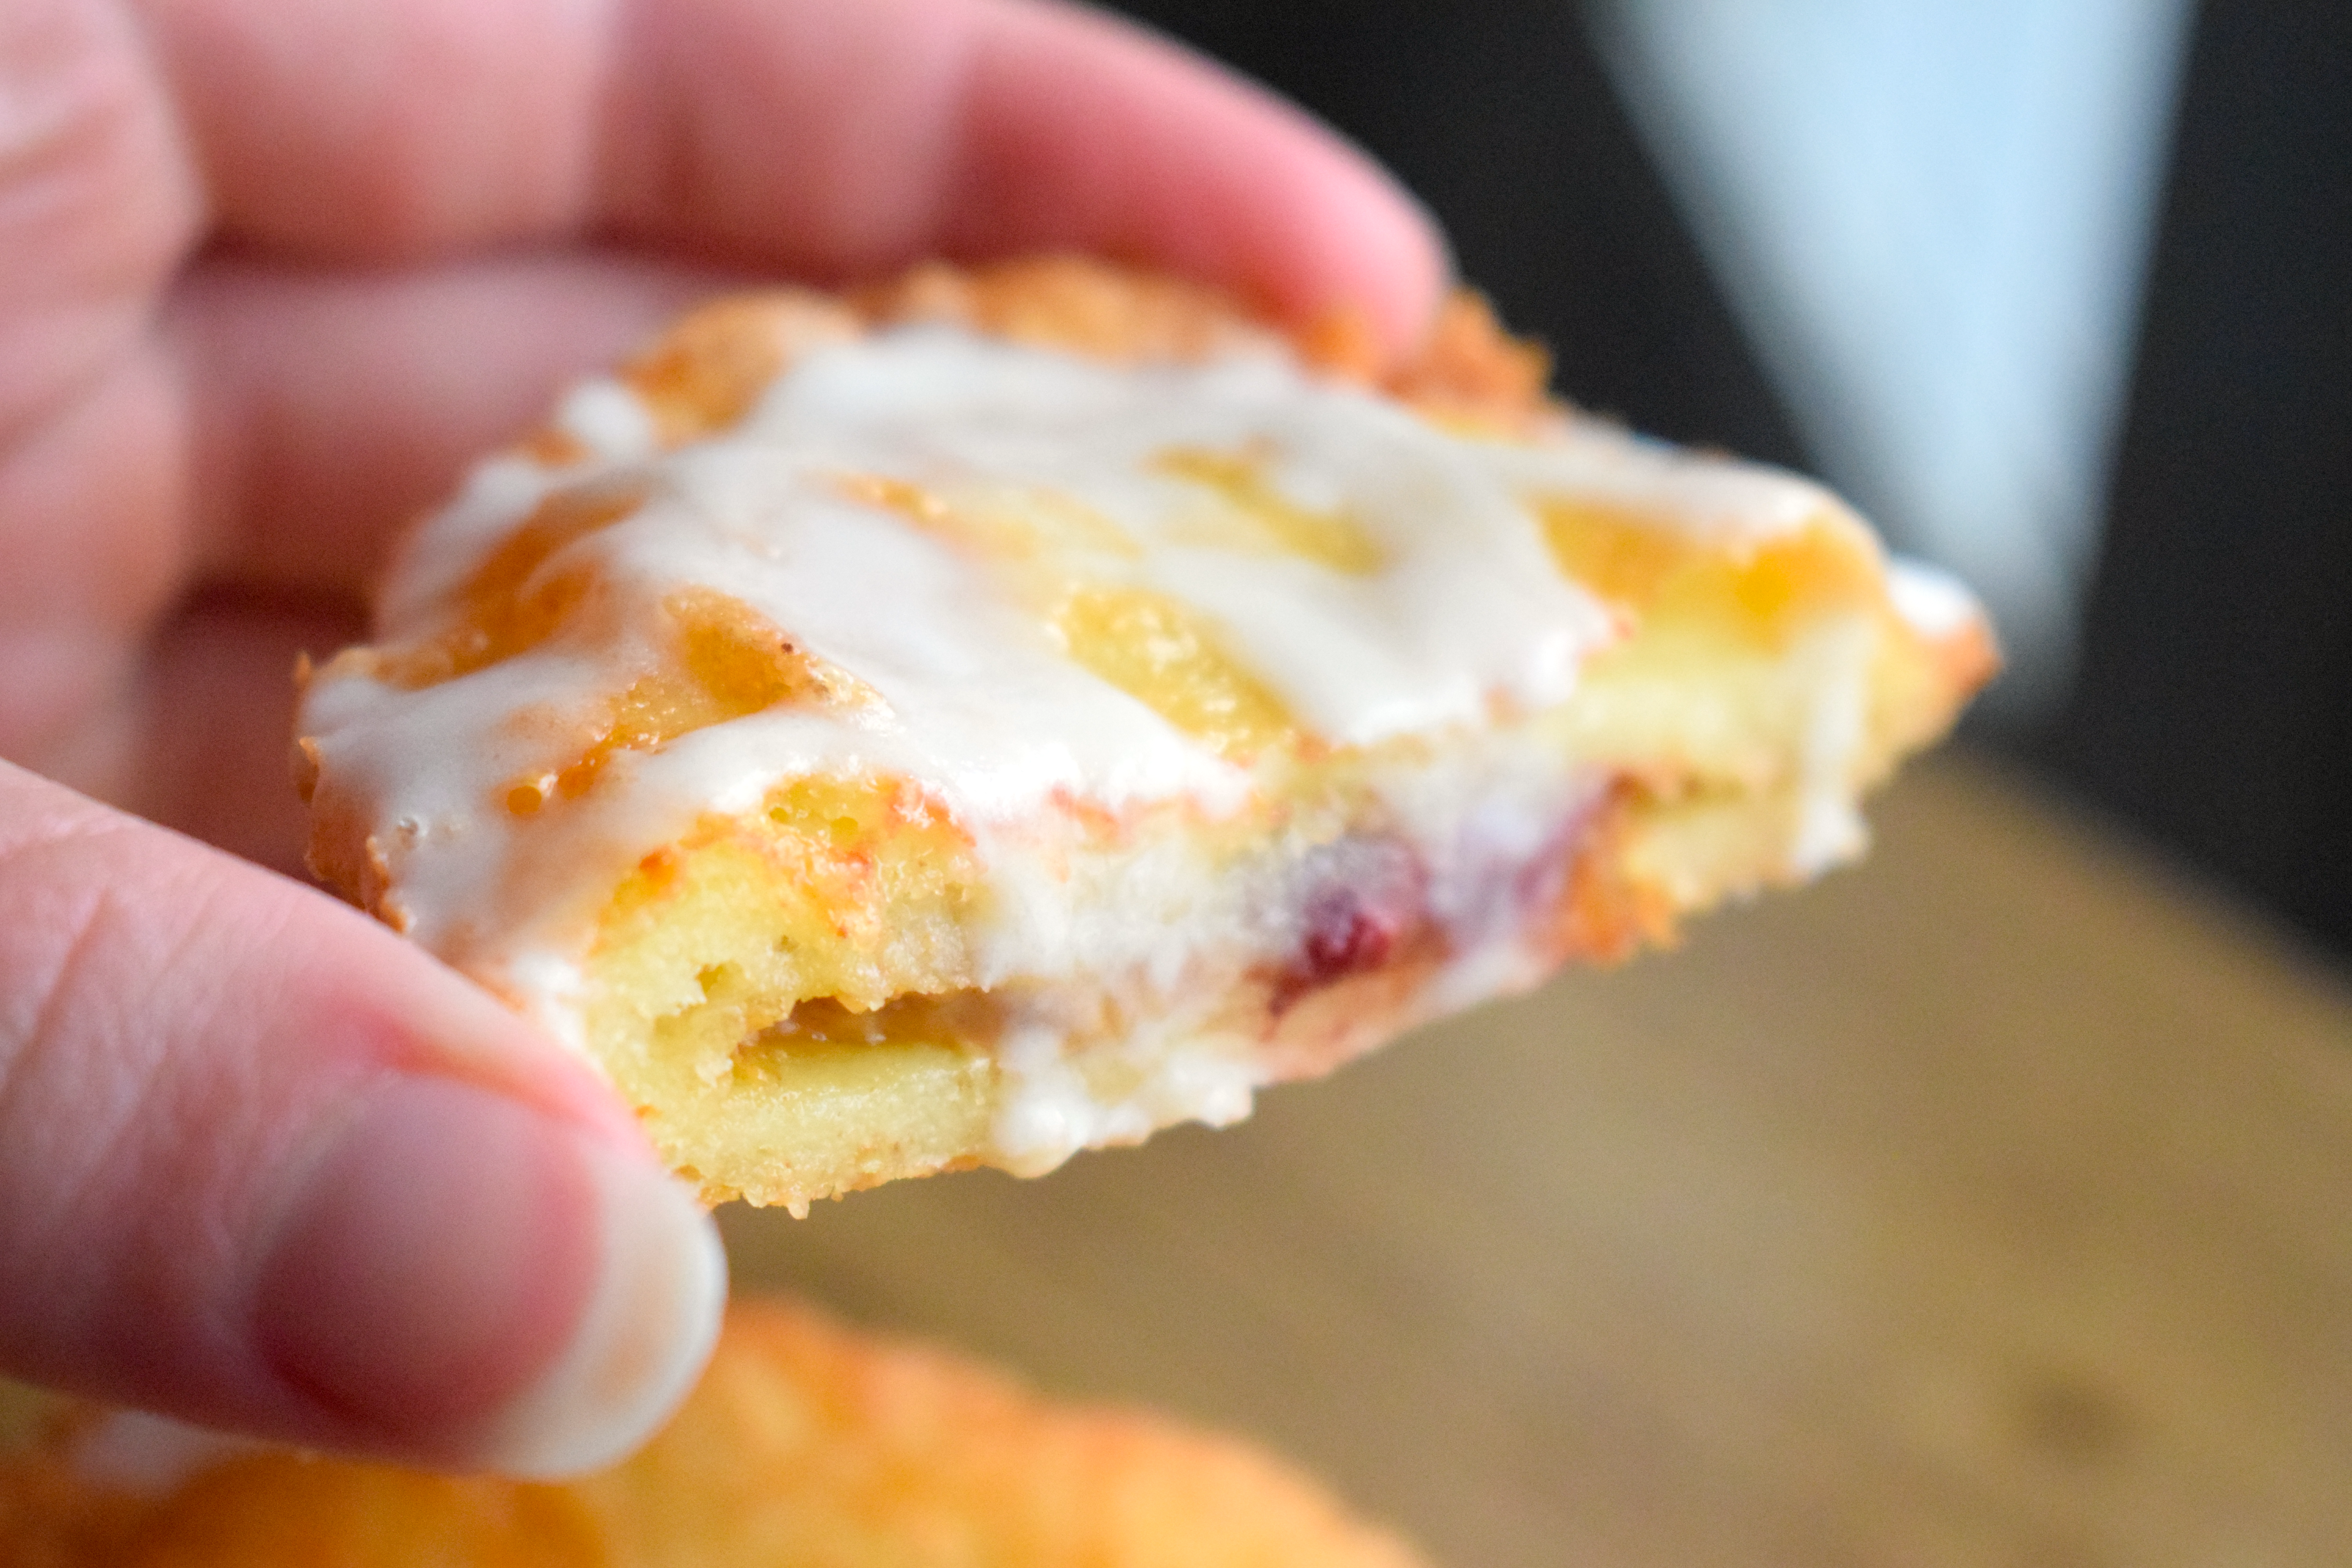 keto fried peanut butter and jelly